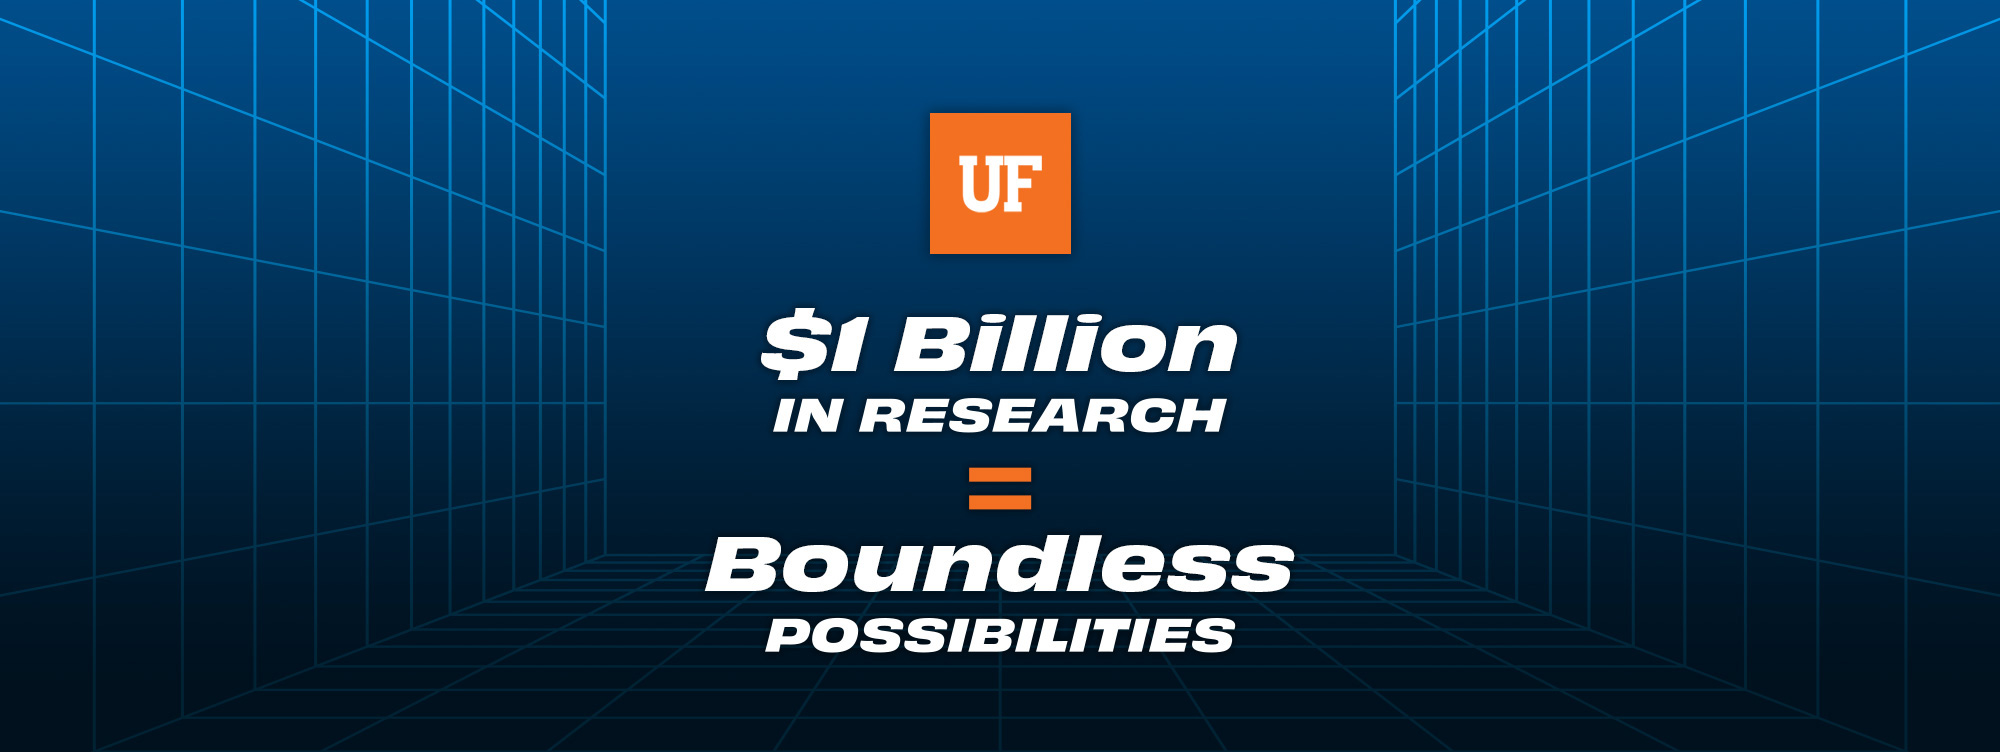 $1 Billion in Research = Boundless Possibilities